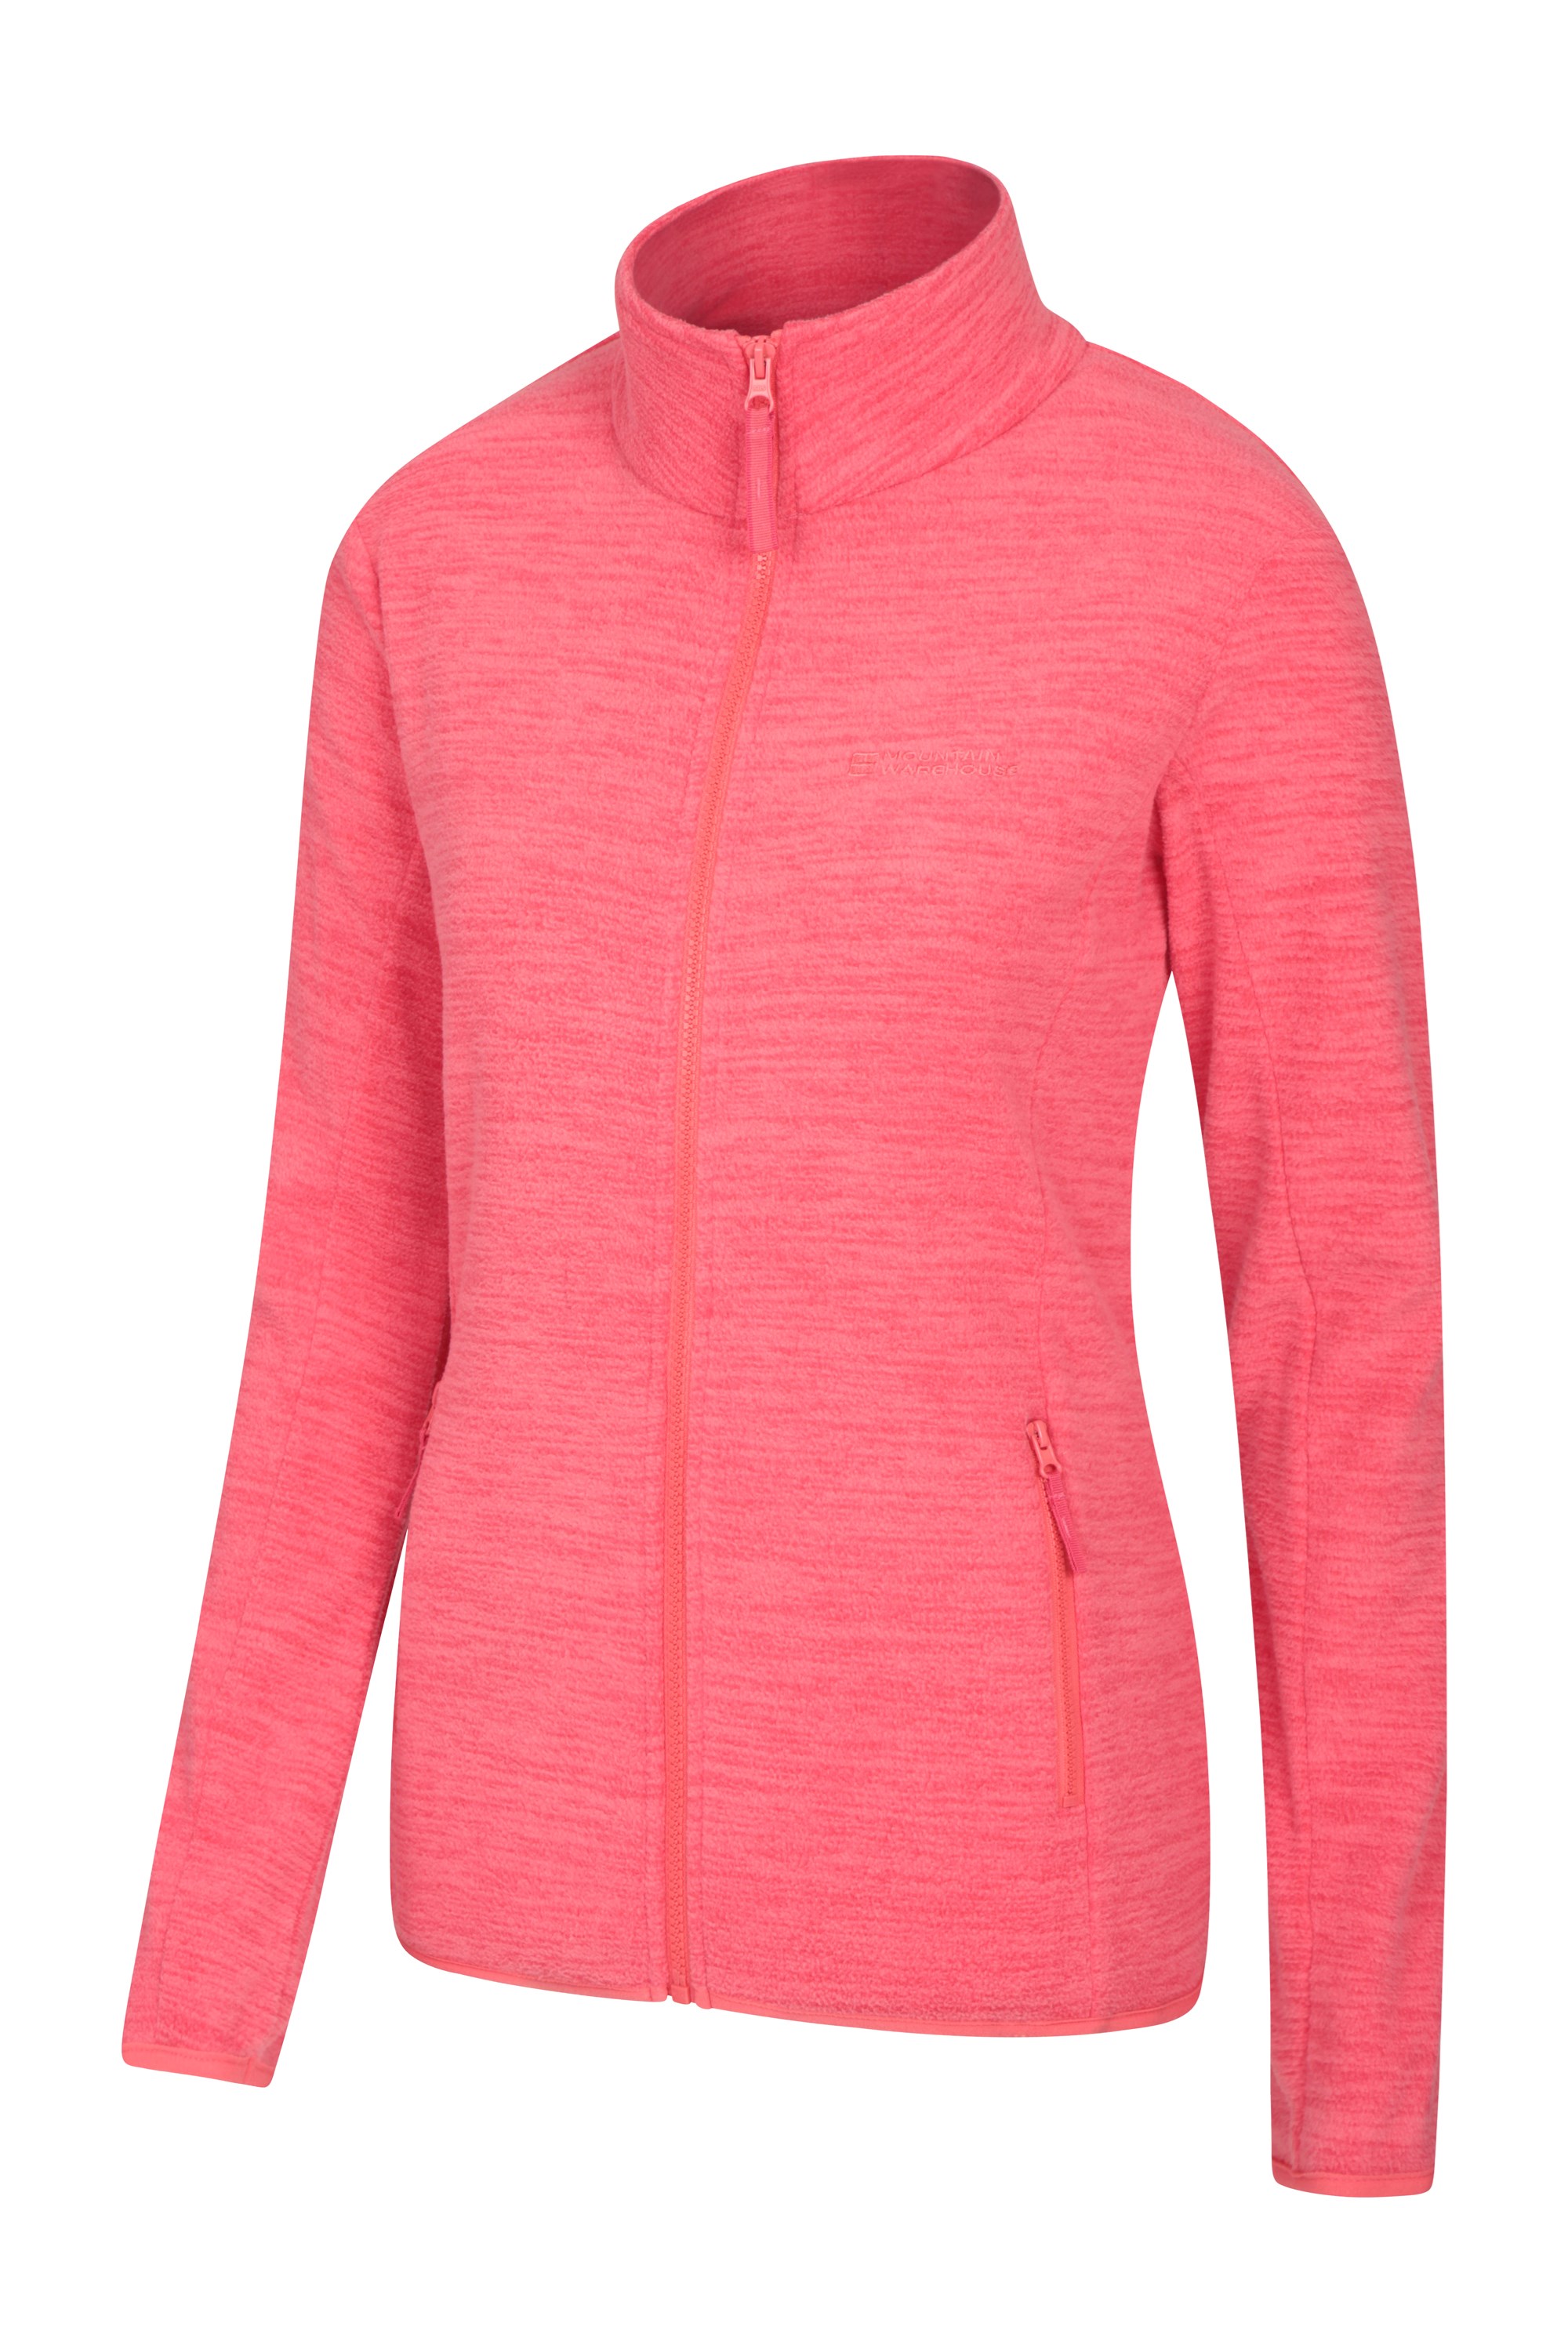 Antipill Breathable Baselayer Mountain Warehouse Snowdon Womens Full Zip Fleece Best for Winter Lightweight Ladies Sweater Top Camping & Hiking Spring